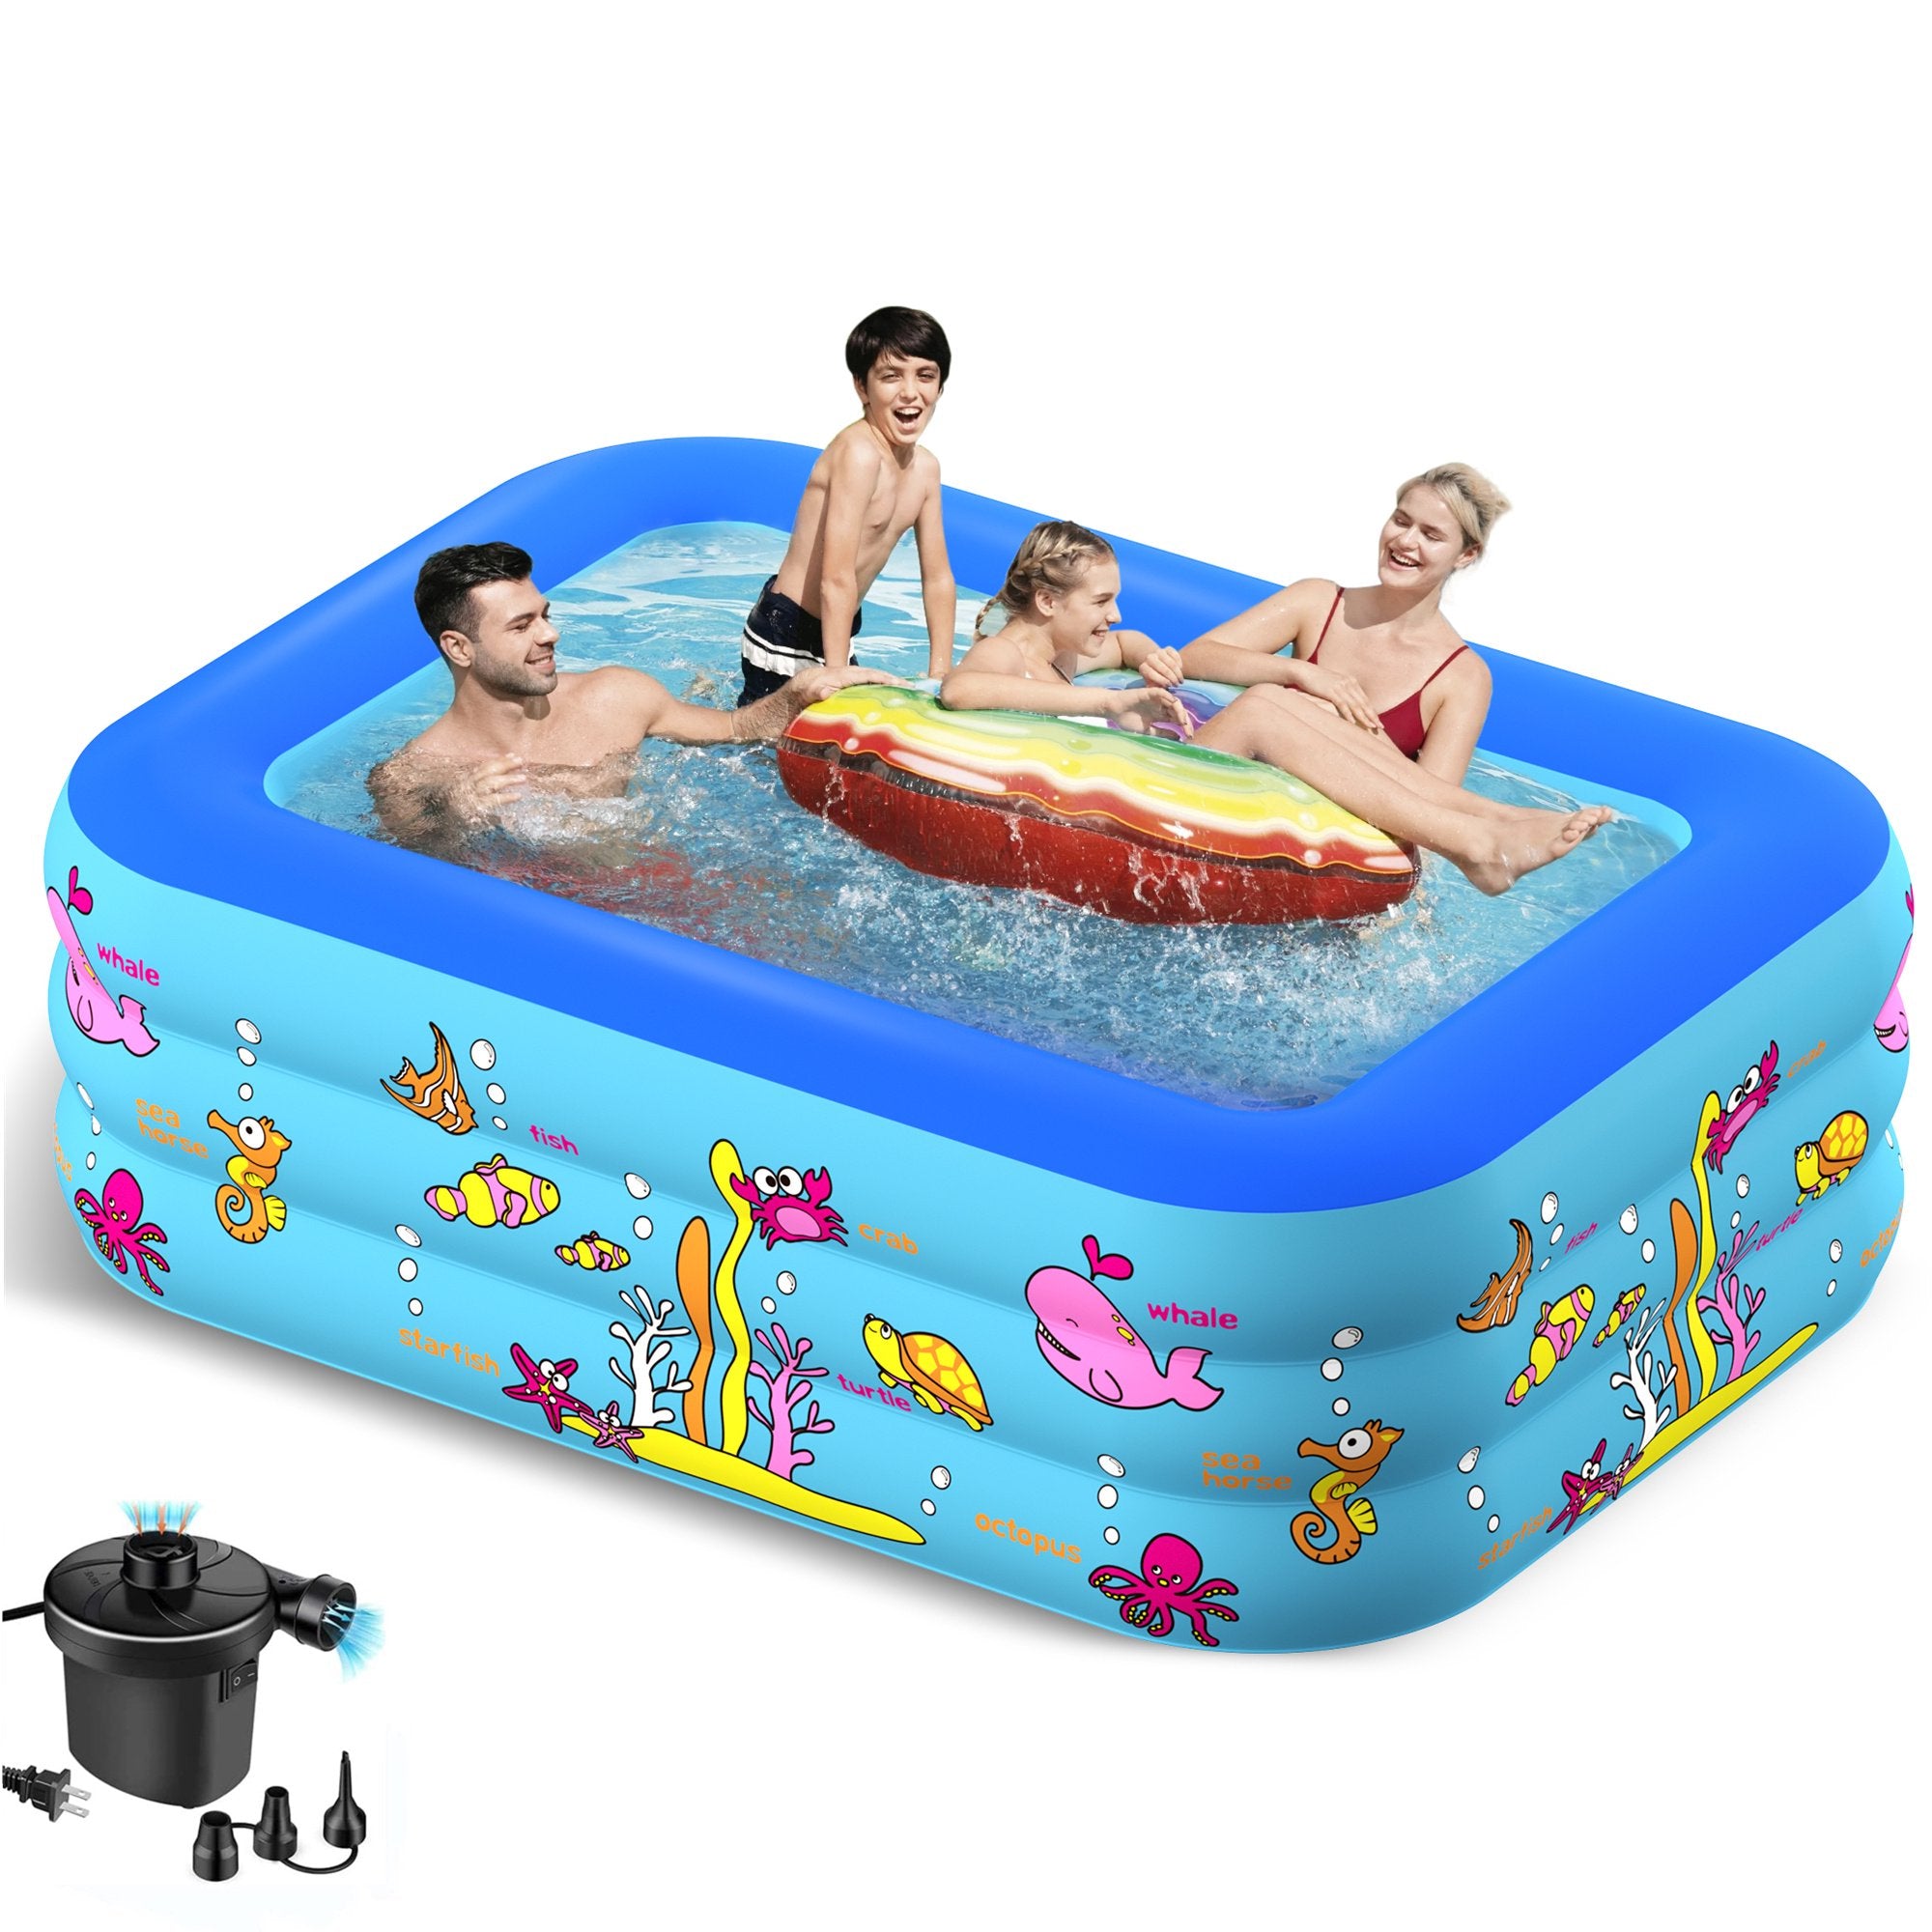 JoRocks 83" x 57" x 25" Inflatable Swimming Pool with Pump, Rectangle, Blue